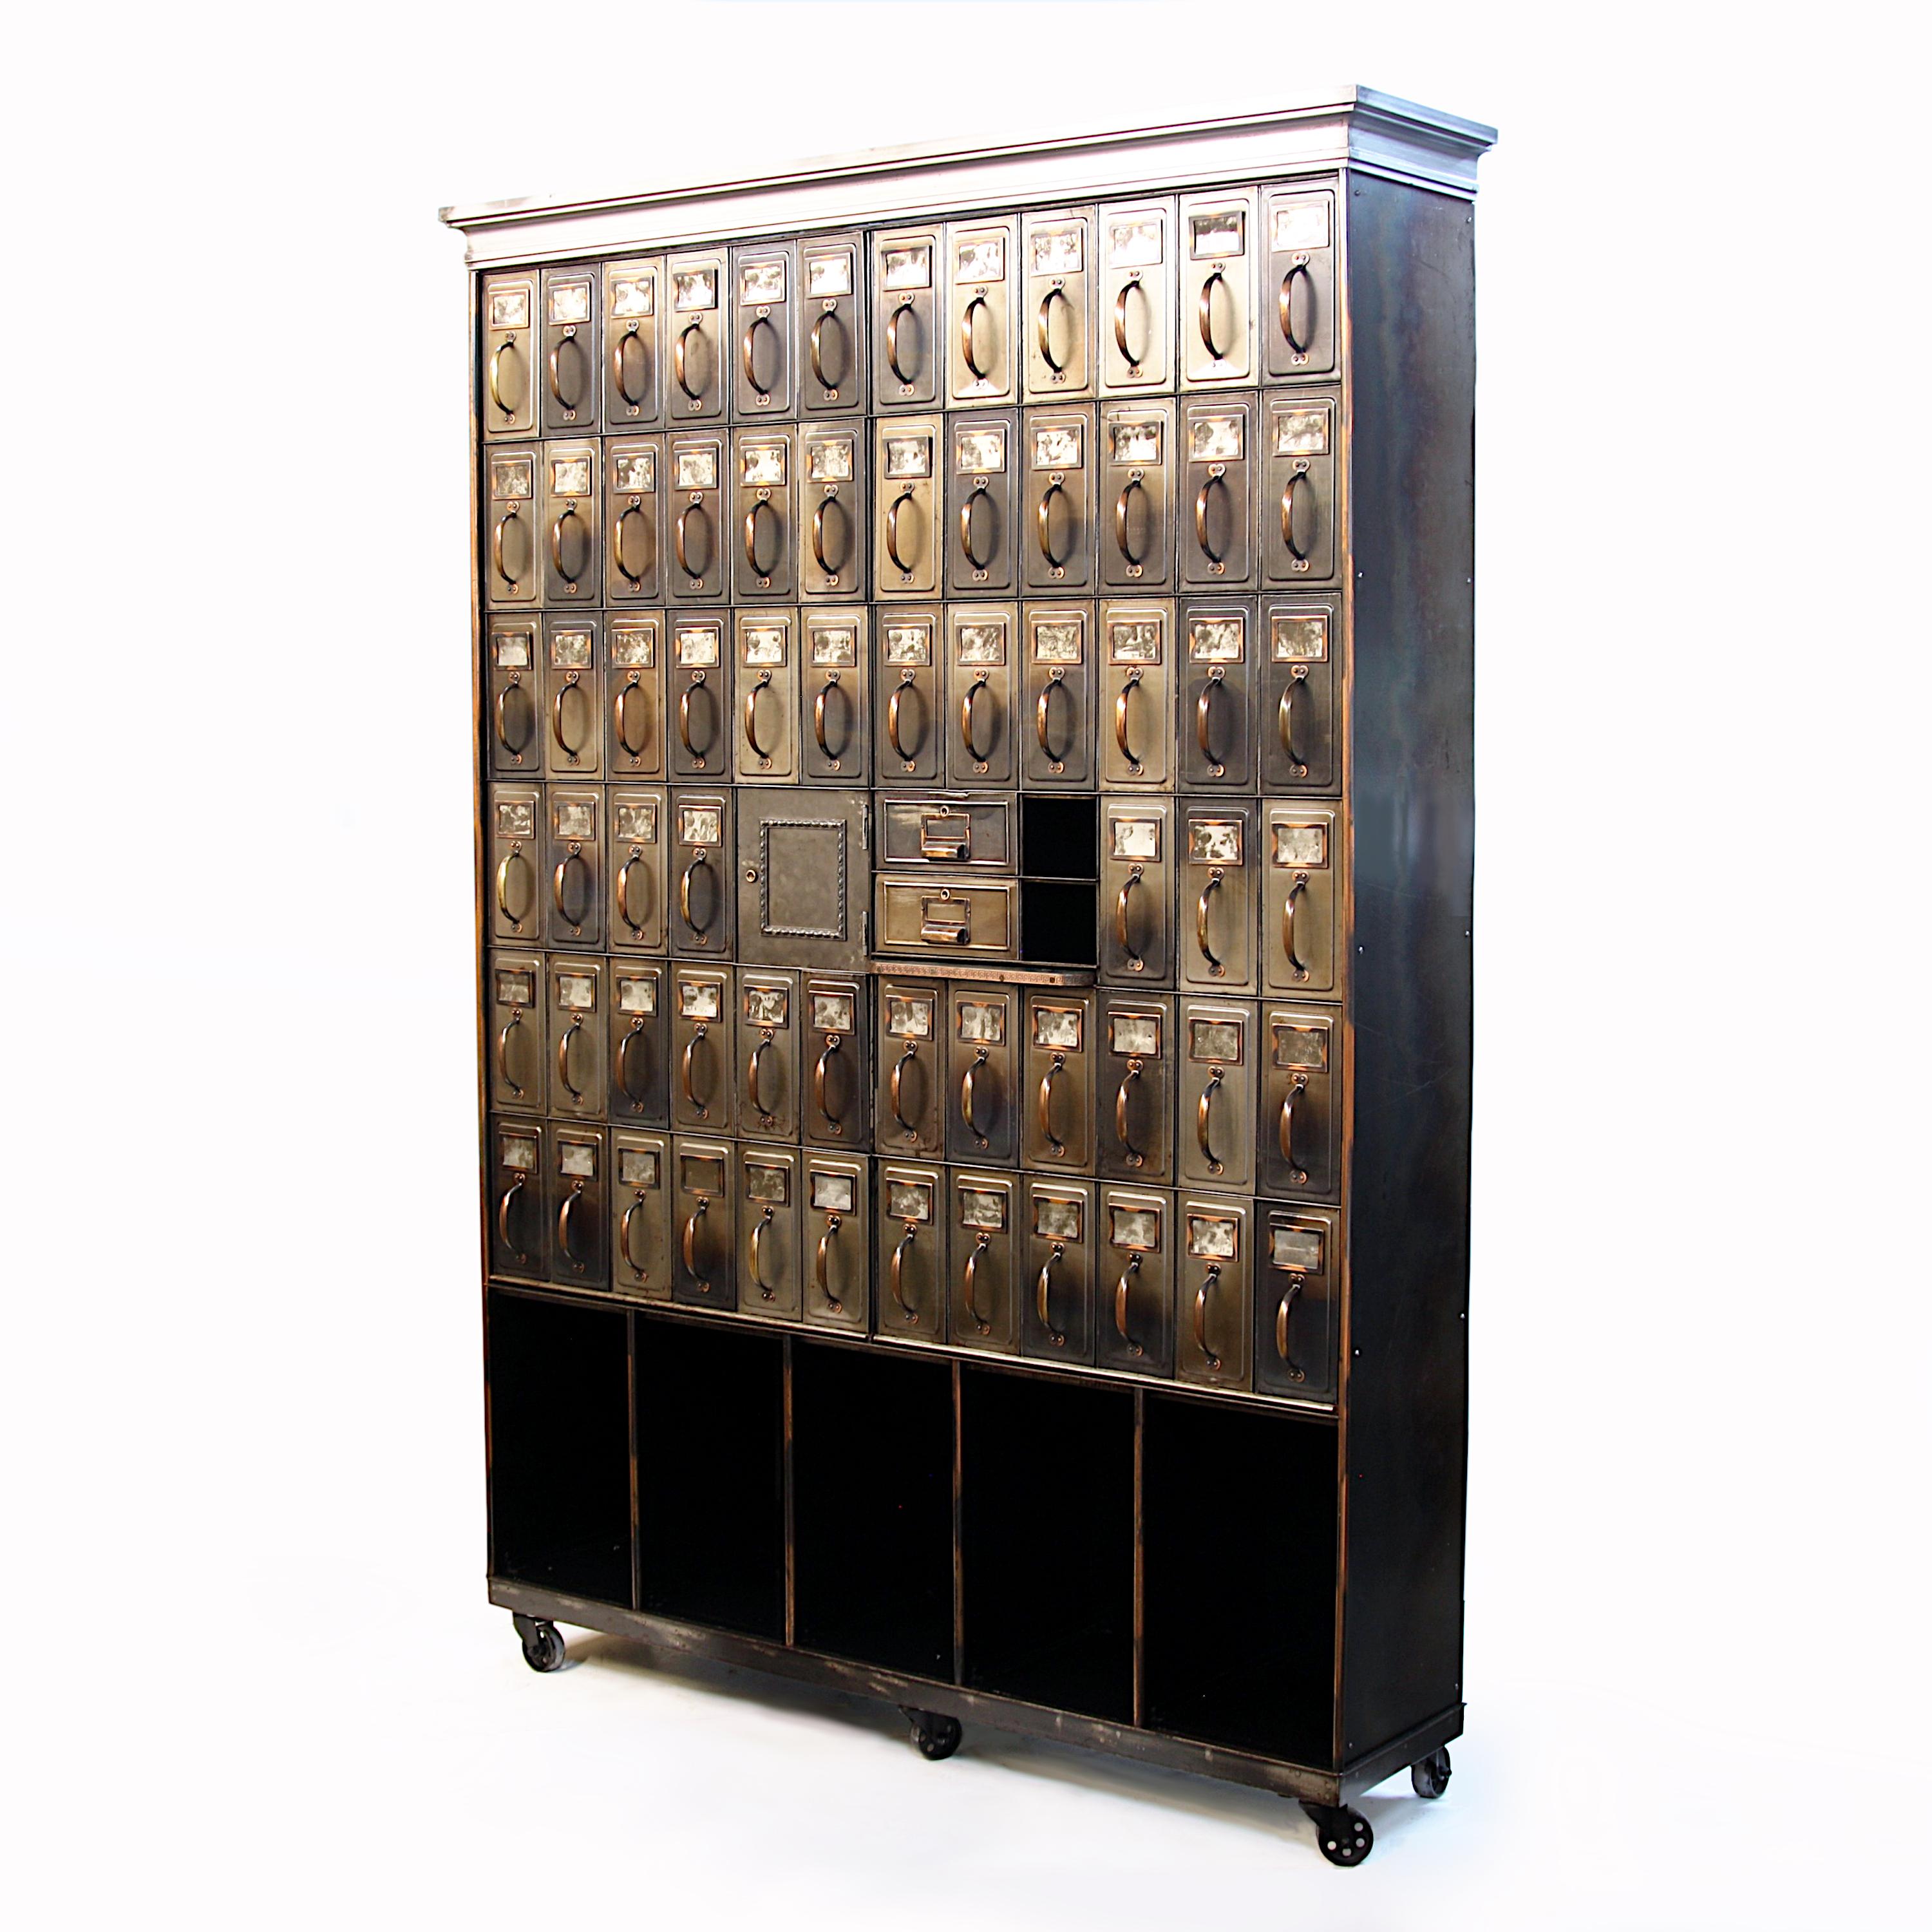 This spectacular turn-of-the-century era file cabinet was recently pulled from the vault of a western Iowa courthouse where it has sat for nearly 120 years! The entire exterior (other than the back) has been hand-stripped and polished to showcase